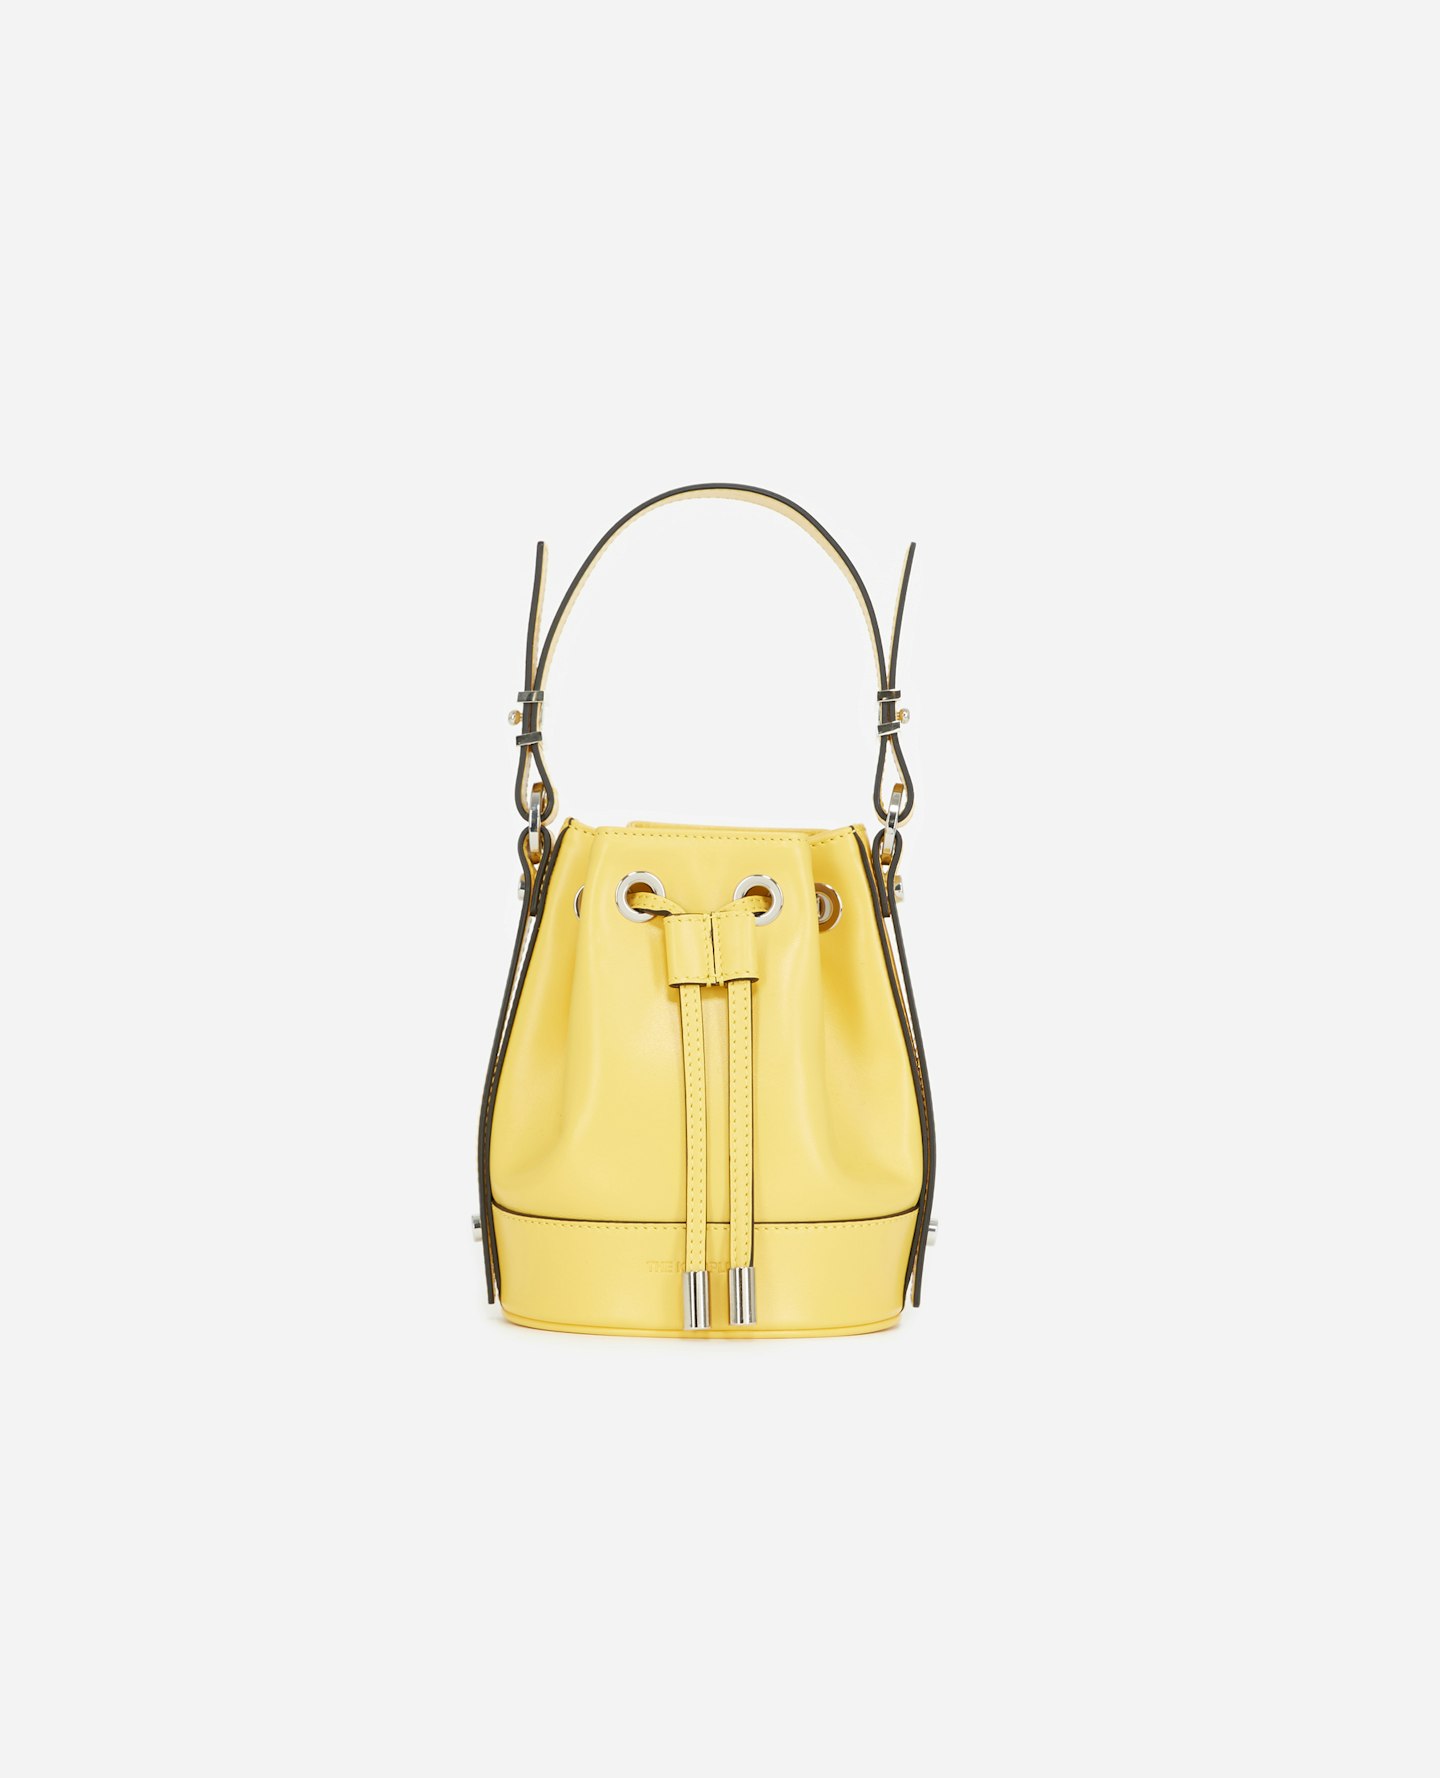 The Kooples, Nano Tina Bag In Smooth Yellow Leather, £240